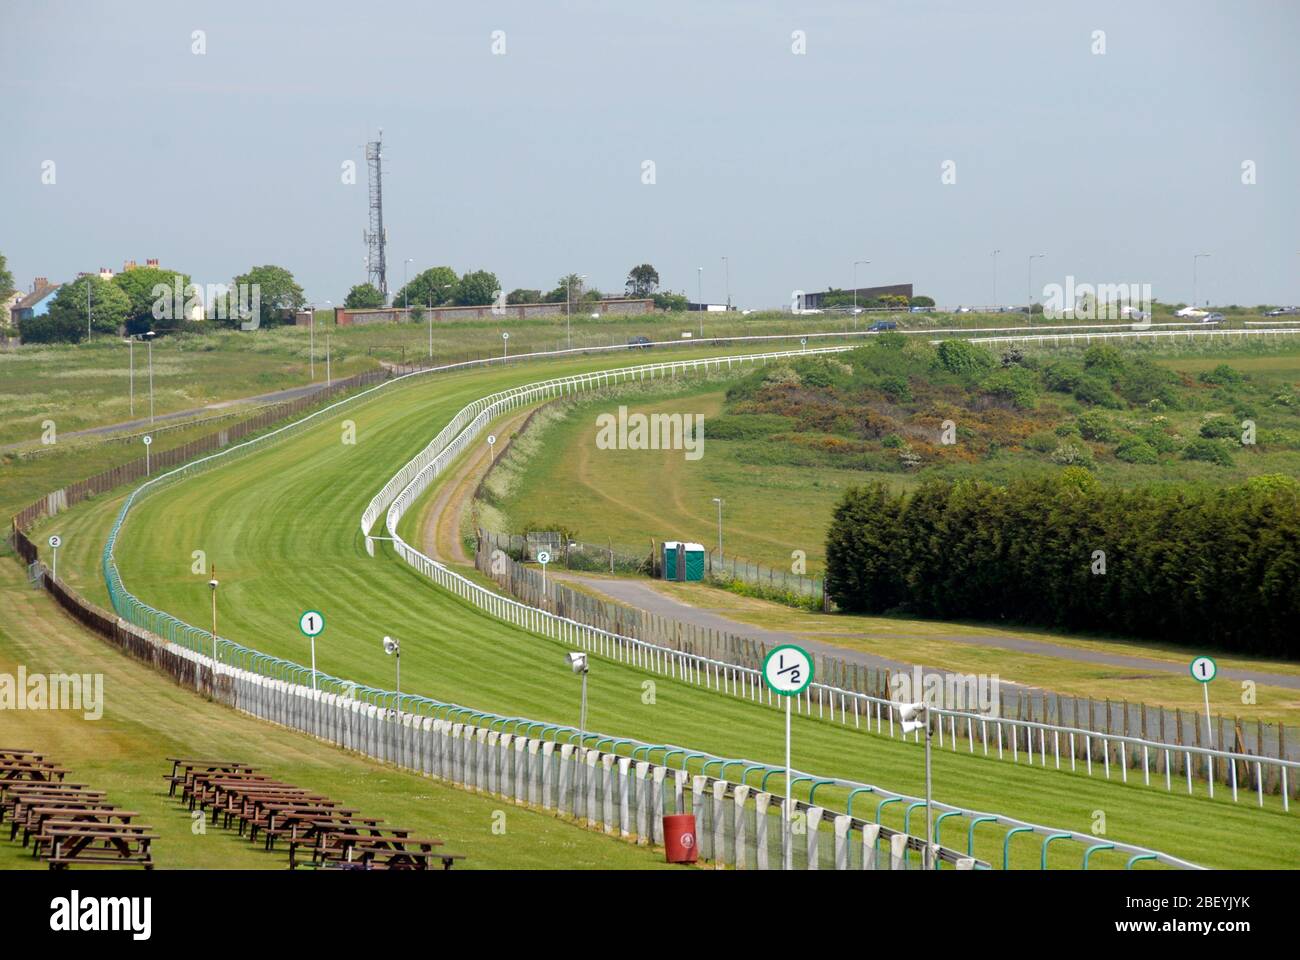 Horse racing course, empty as there was no meeting this day Stock Photo